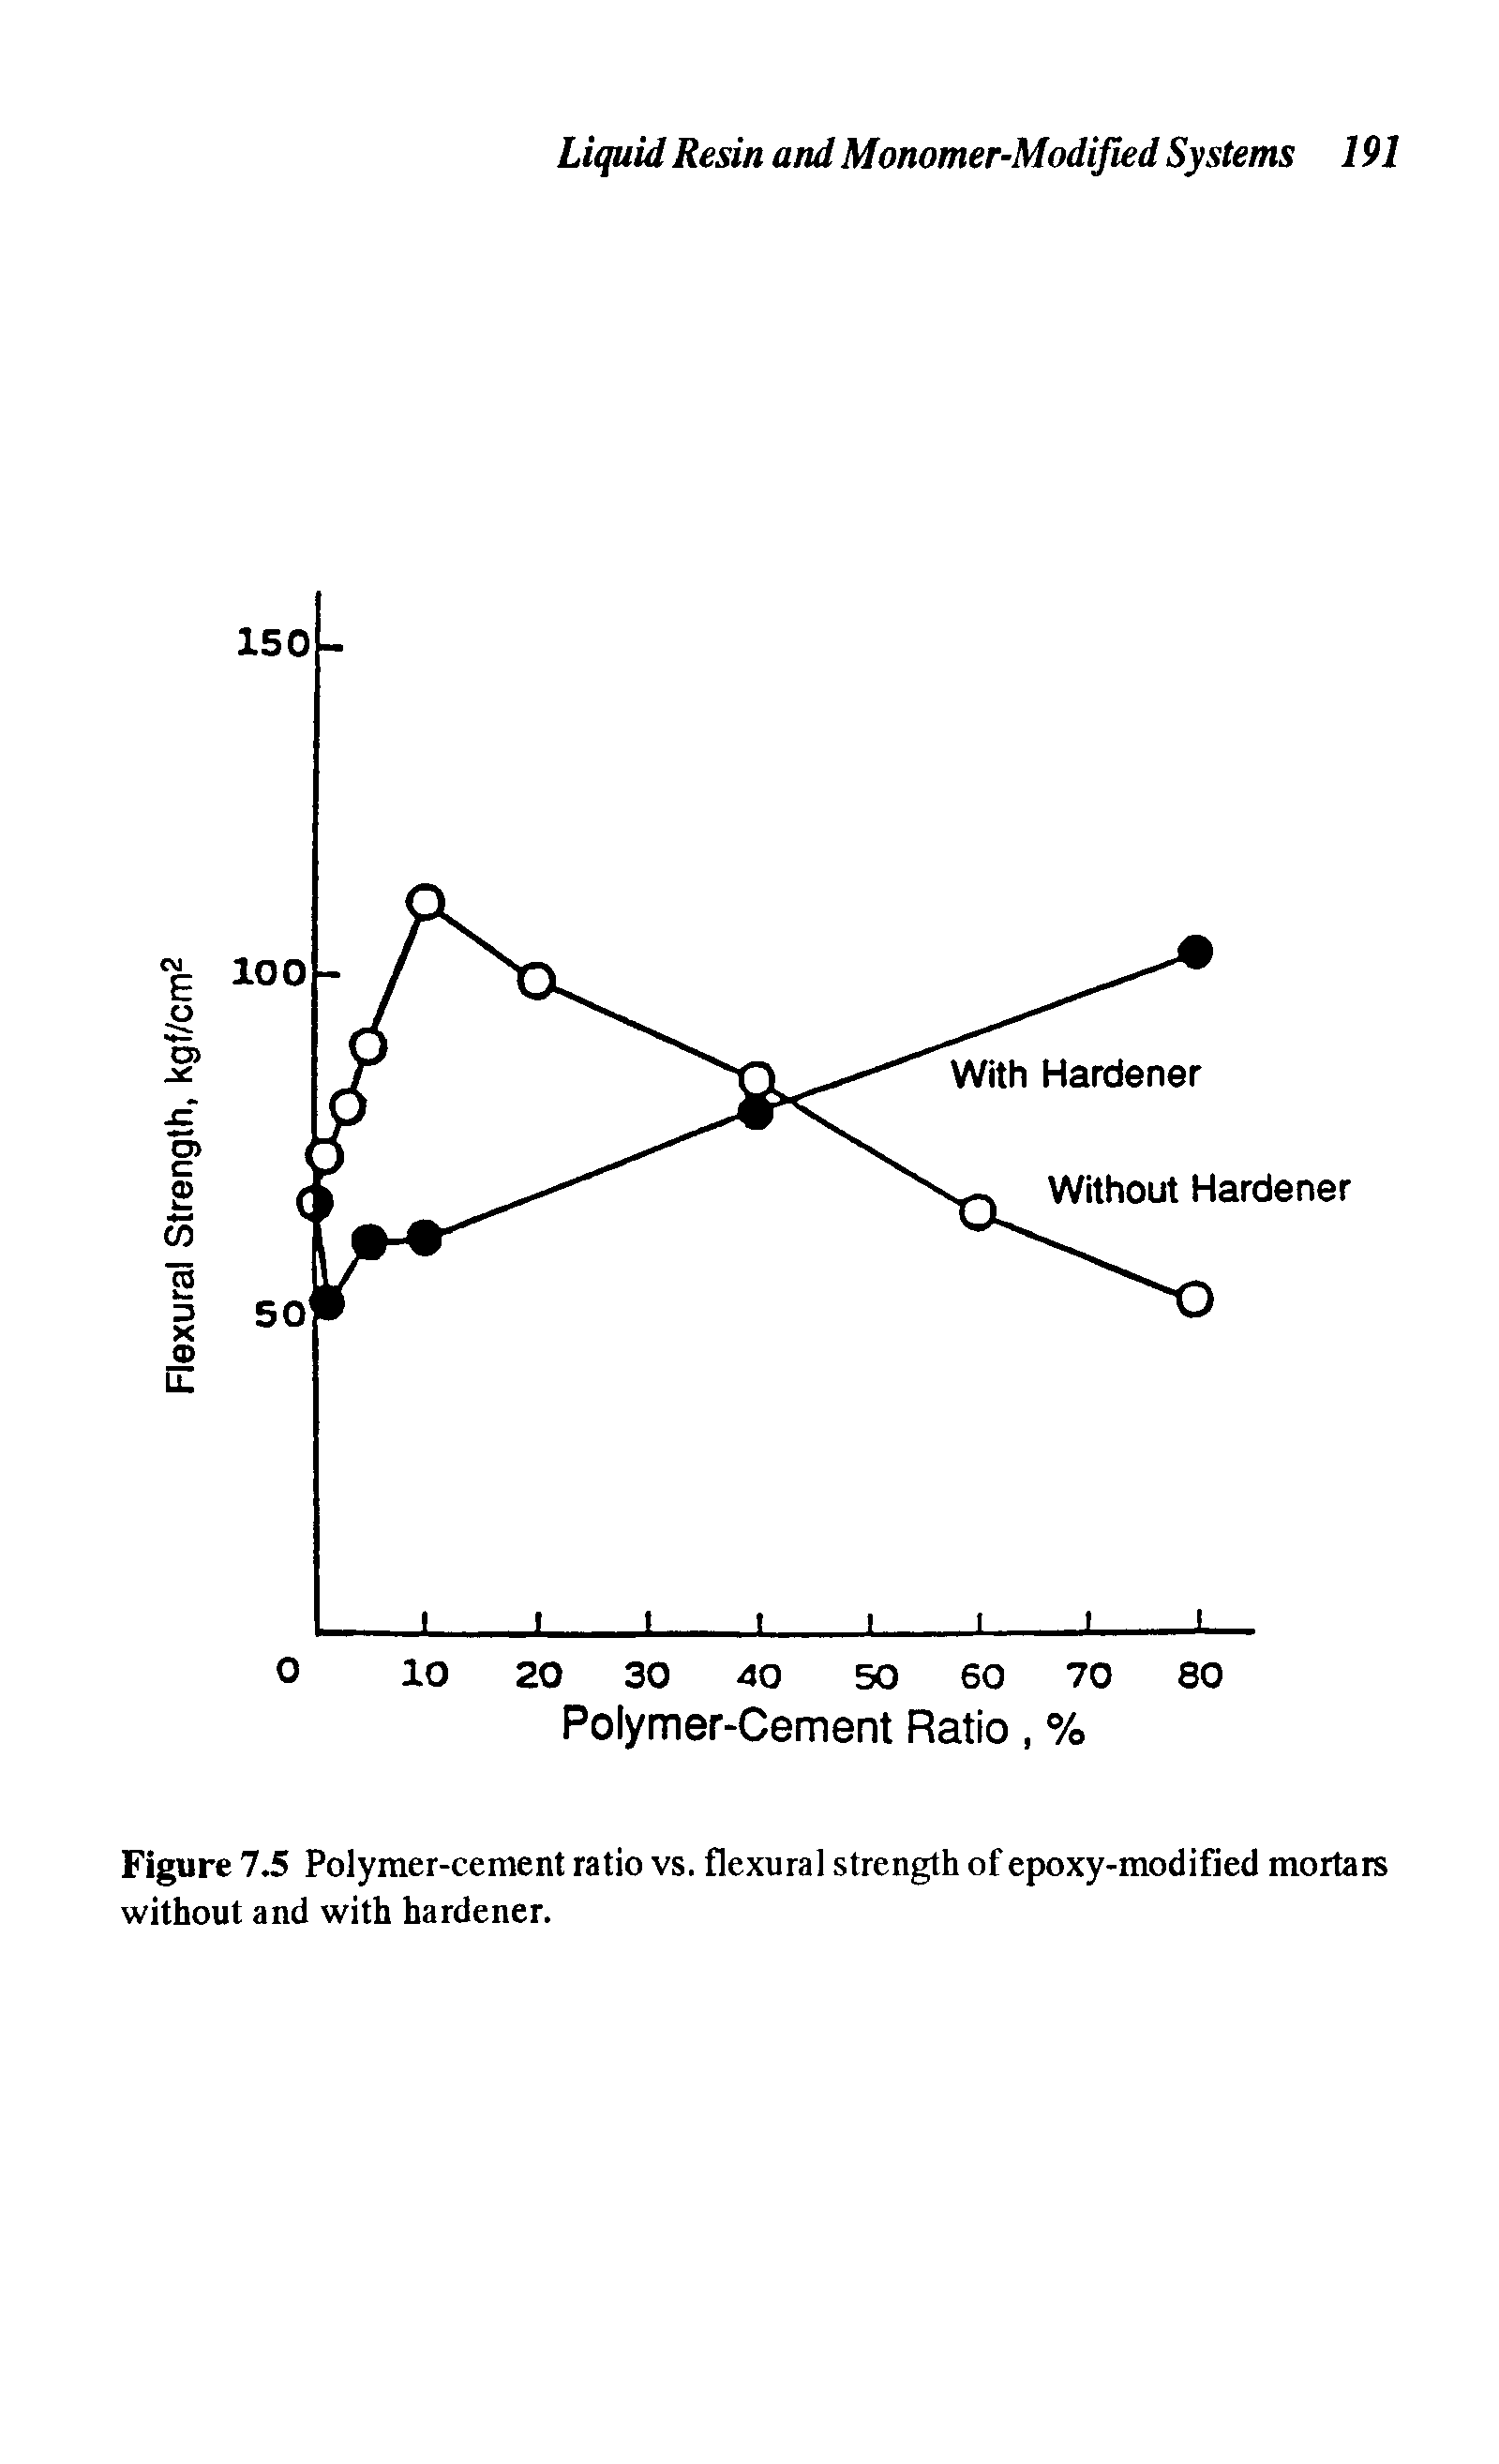 Figure 7.5 Polymer-cement ratio vs. flexural strength of epoxy-modified mortars without and with hardener.